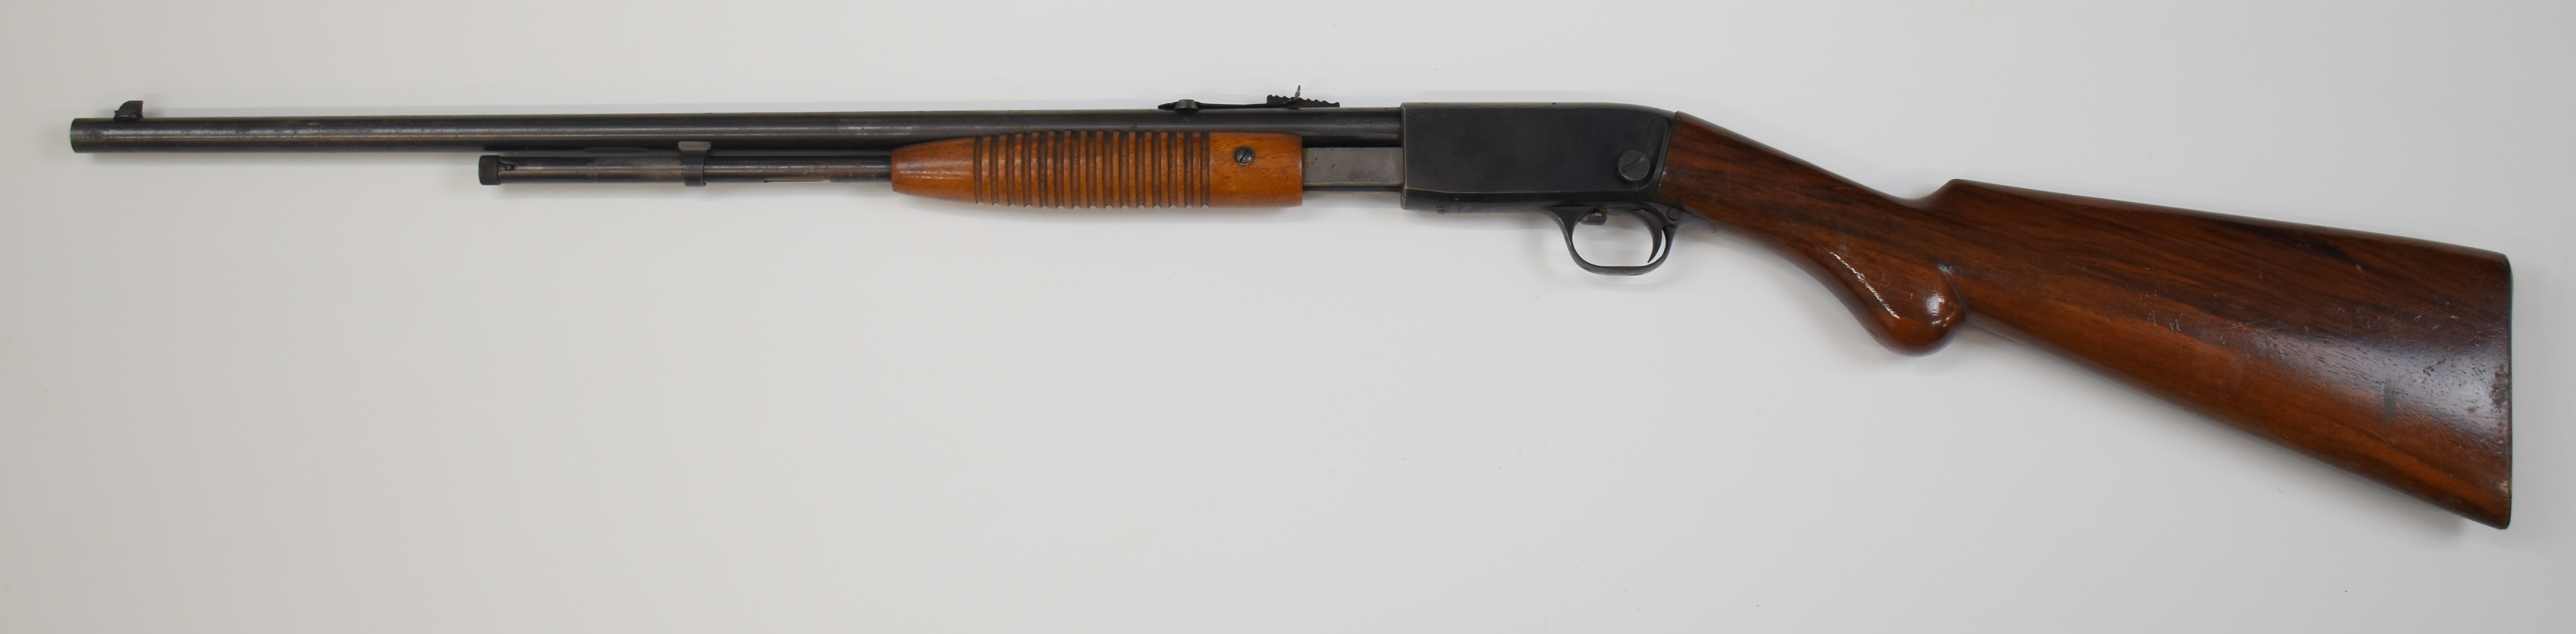 Browning .22 pump-action rifle with semi-pistol grip, adjustable sights and 21.5 inch barrel, - Image 6 of 9